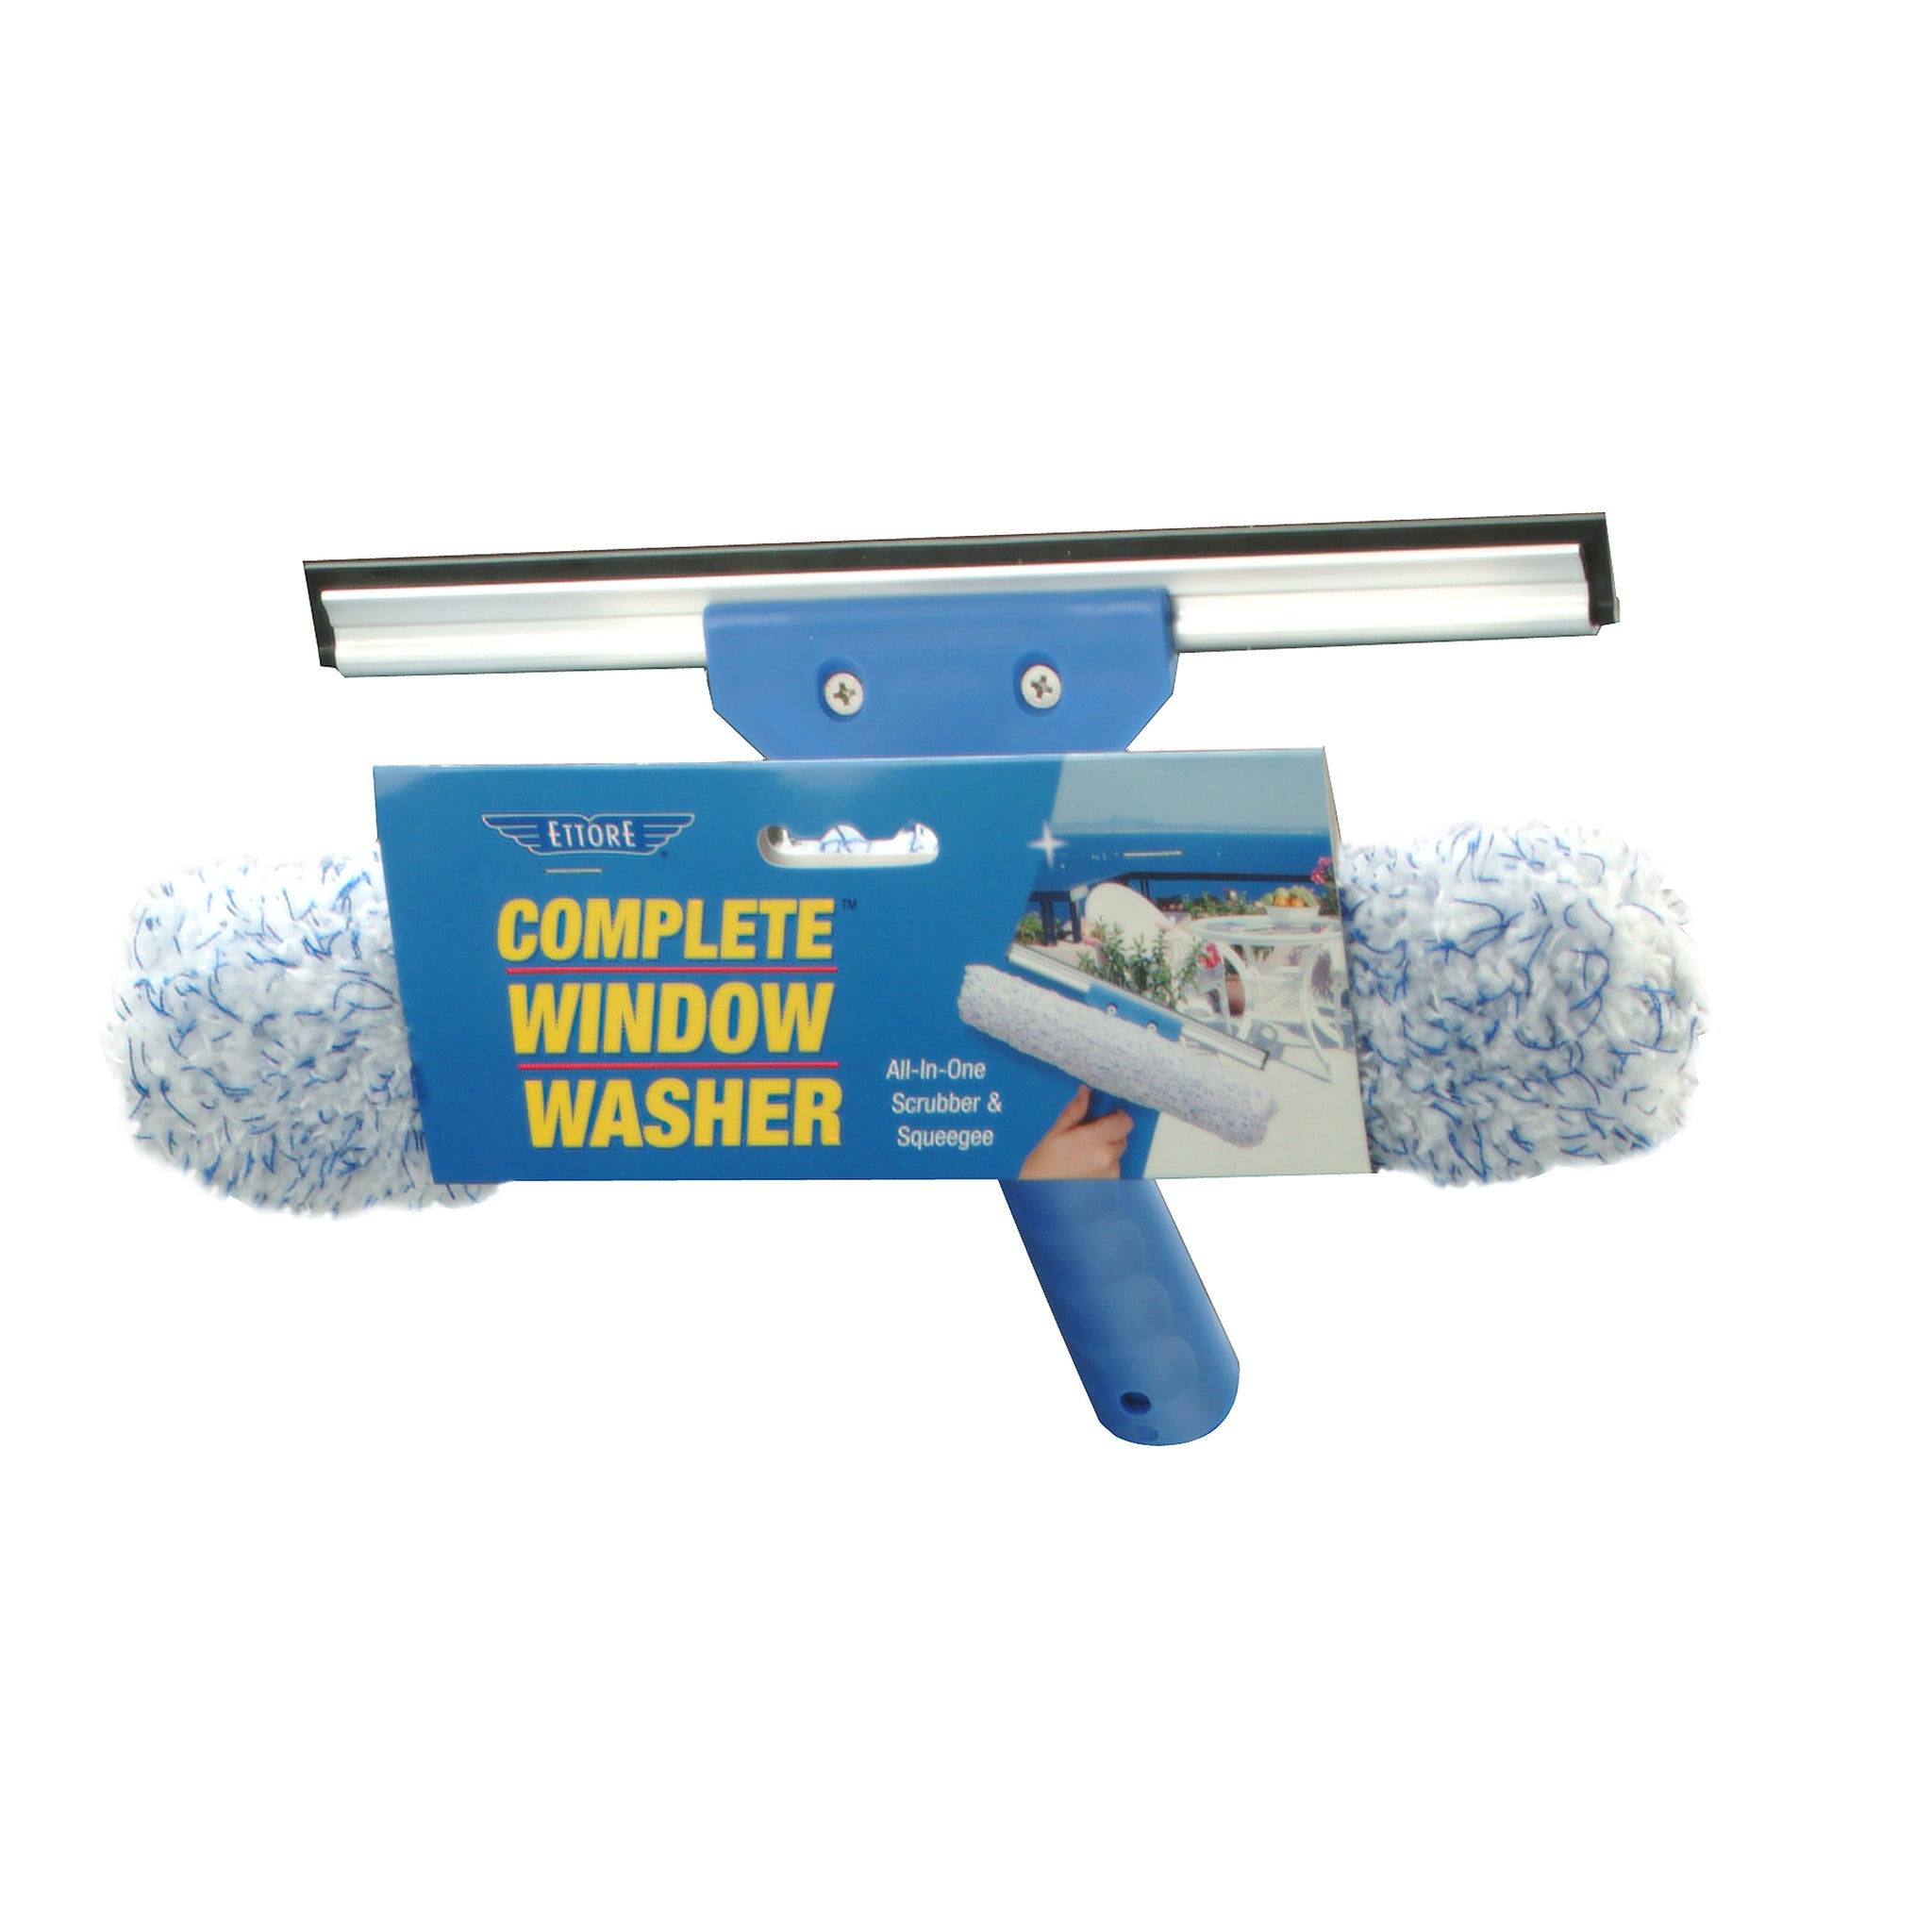 Squeegee and Microfiber Scrubber Combo, Extension Pole Sold